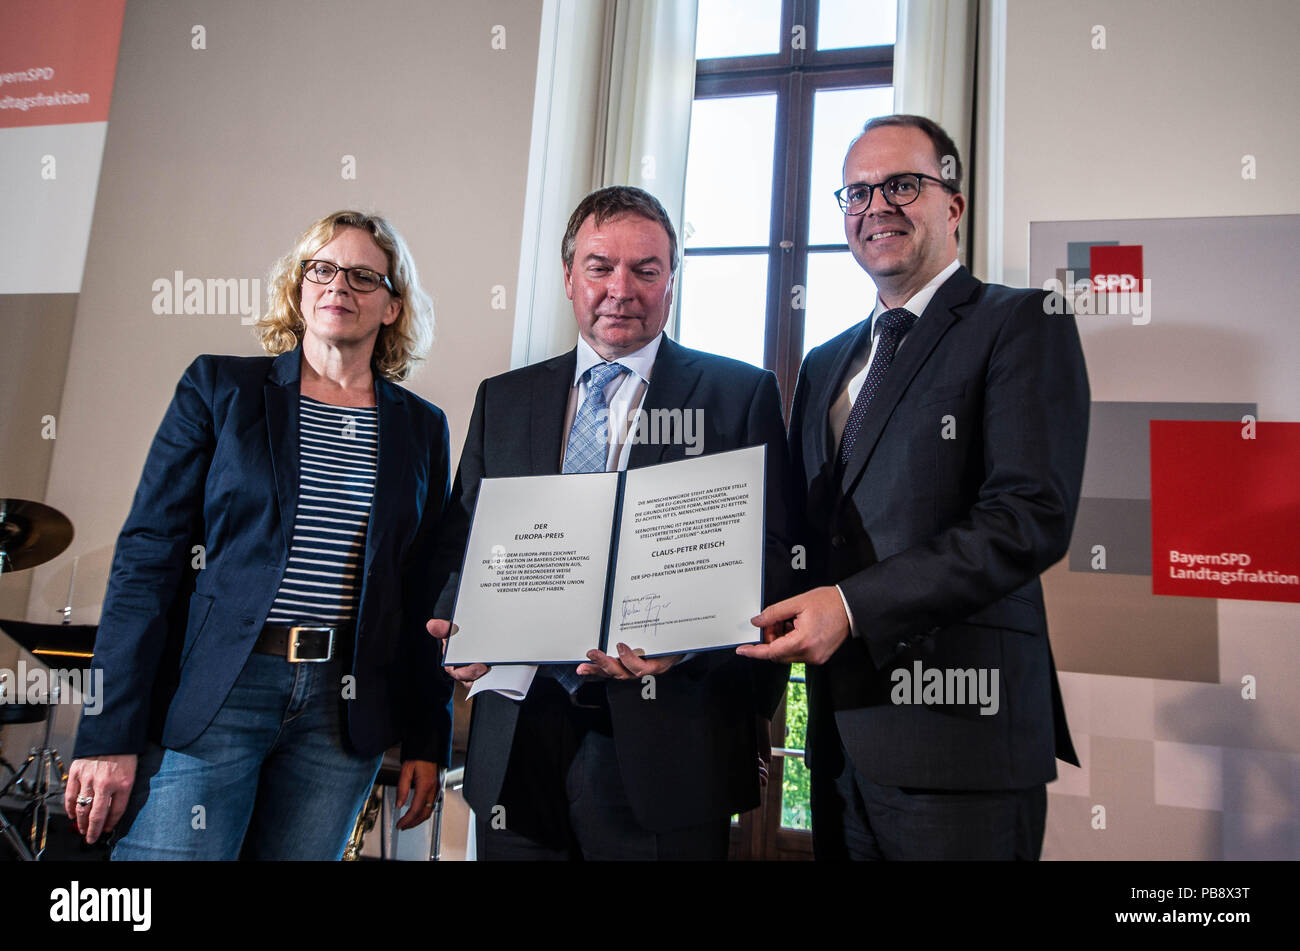 Munich, Bavaria, Germany. 27th July, 2018. Captain Claus Peter Reisch of the Mission Lifeline NGO received the Europa-Preis (Europe Award) at Bavaria's Landtag (Parliament) for his humanitarian engagement in the Mediterranean in rescuing hundreds migrants in danger of drowning. Reisch was recently arrested in Malta, facing various charges related to the use of the vessel in rescue activities. He is currently out on bail and has surrendered his passport while awaiting trial. According to the UN, some 1,500 migrants are estimated to have died while trying to cross the Mediterranean, with so Stock Photo